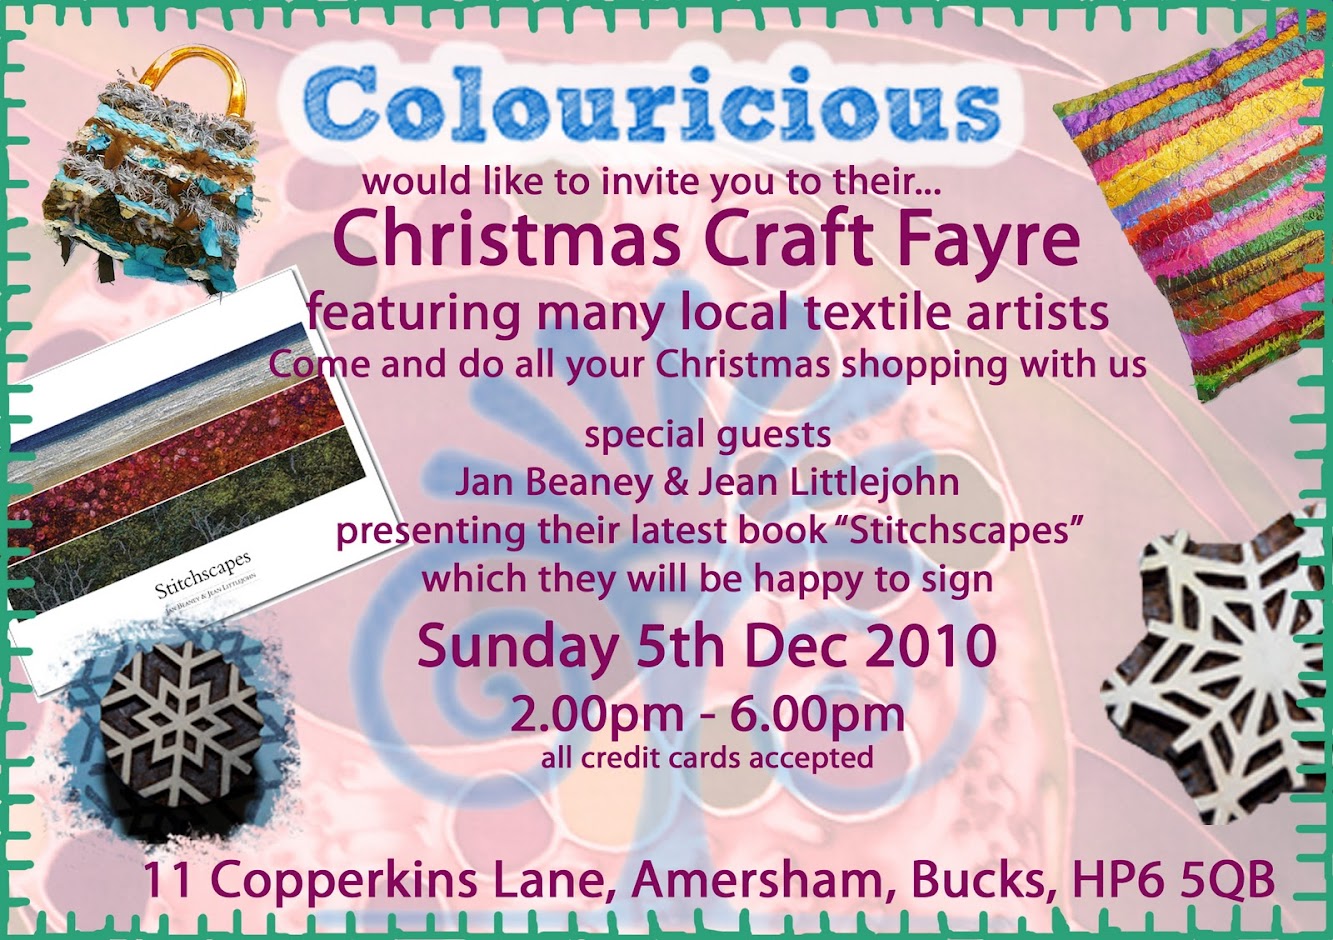 Come Celebrate Christmas with Colouricious!